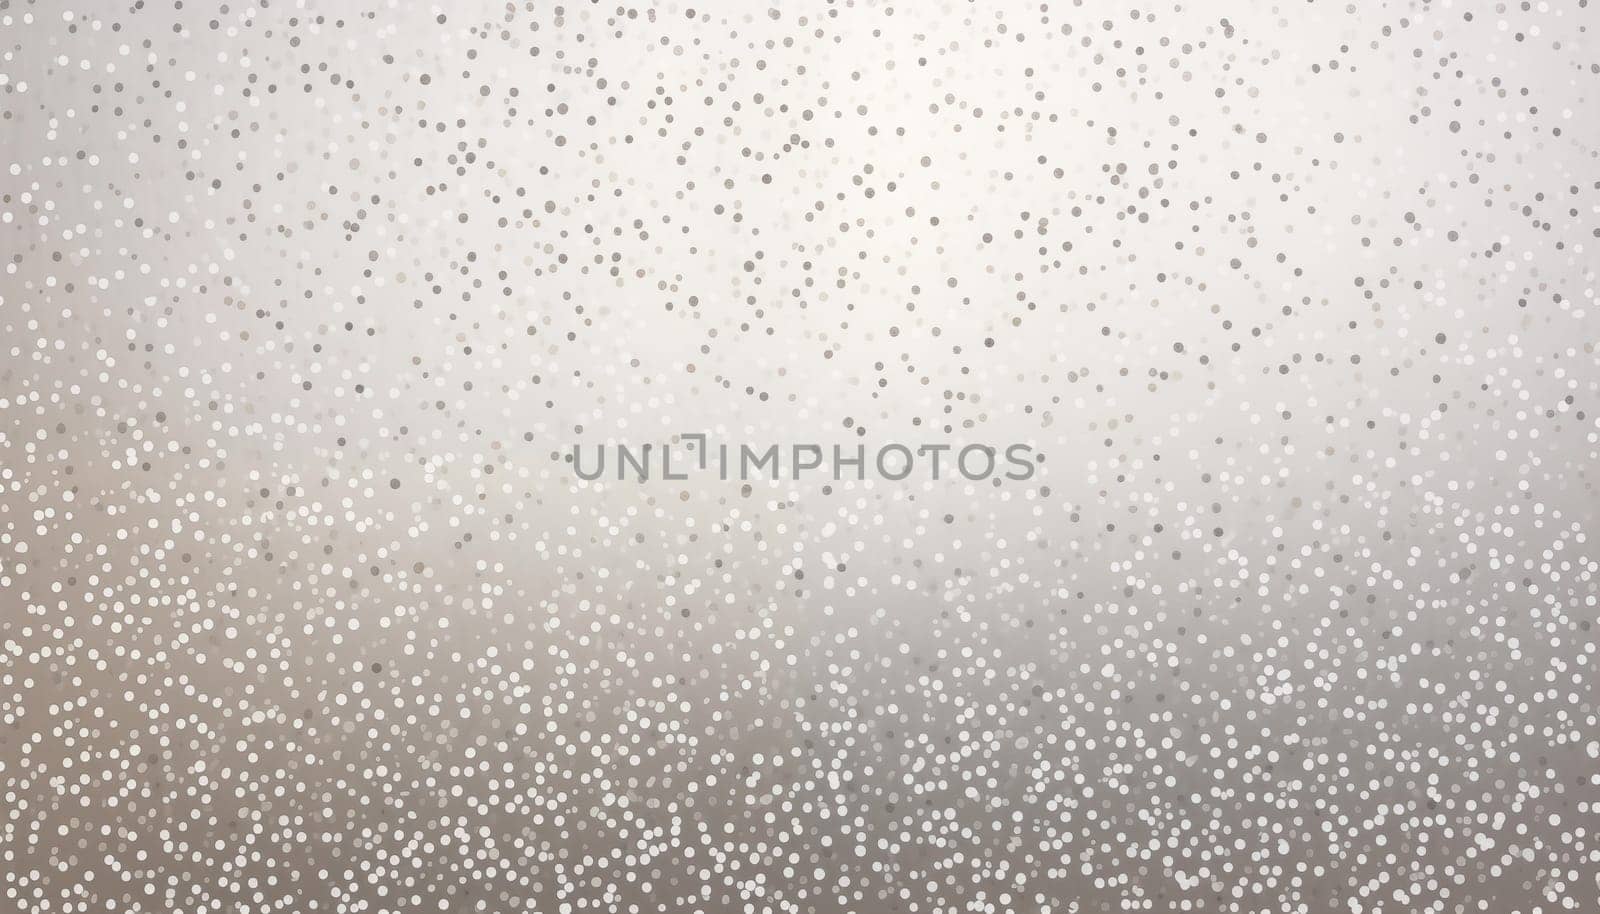 White background with small silver dots by Nadtochiy